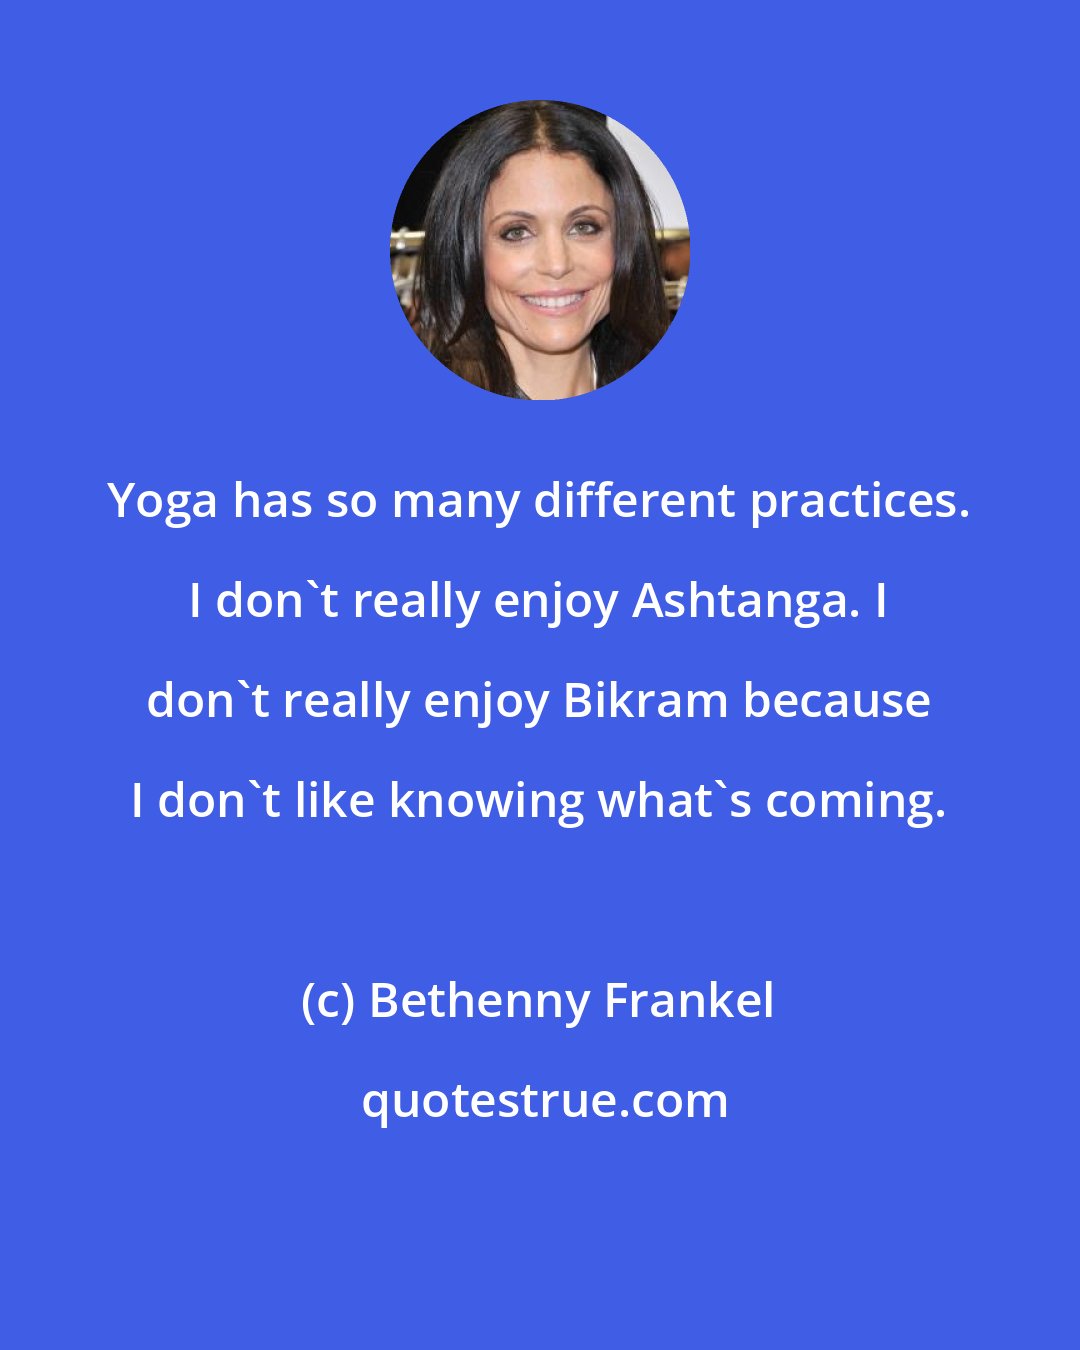 Bethenny Frankel: Yoga has so many different practices. I don't really enjoy Ashtanga. I don't really enjoy Bikram because I don't like knowing what's coming.